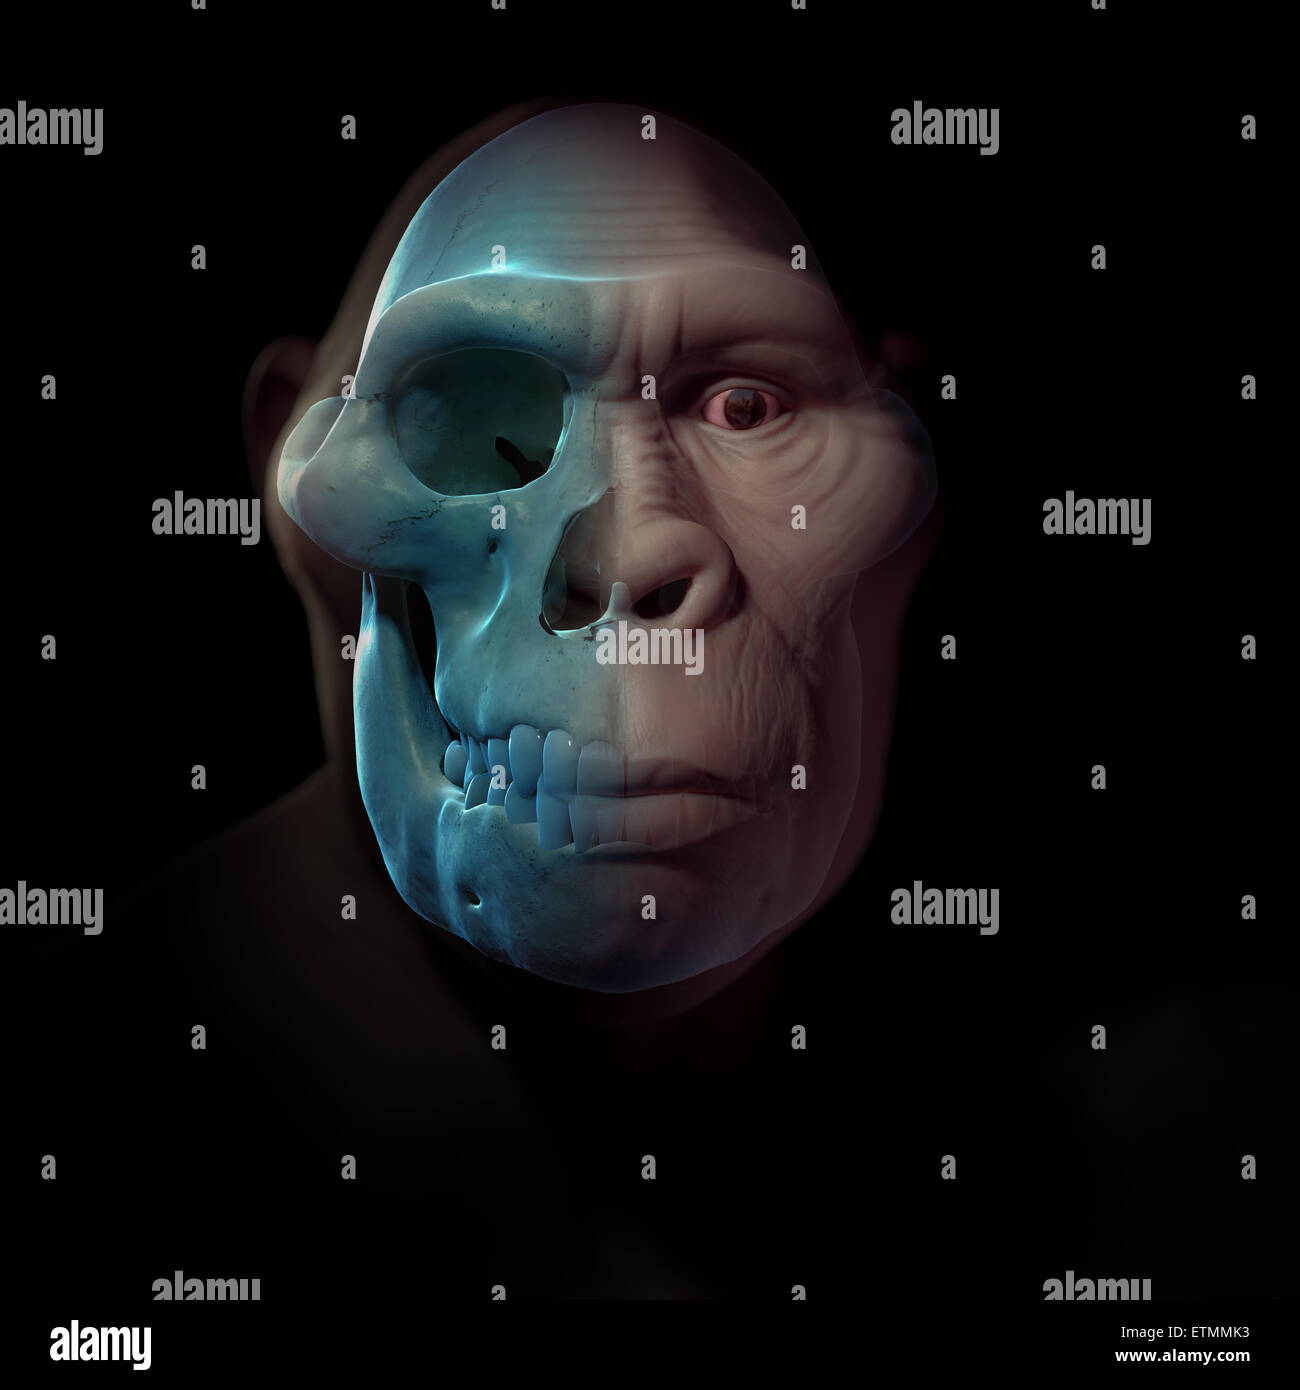 Depiction of an Australopithecus with skull visible in situ.  Australopithecus is an extinct genus of hominids and early ancestor to Homo Sapiens. Stock Photo